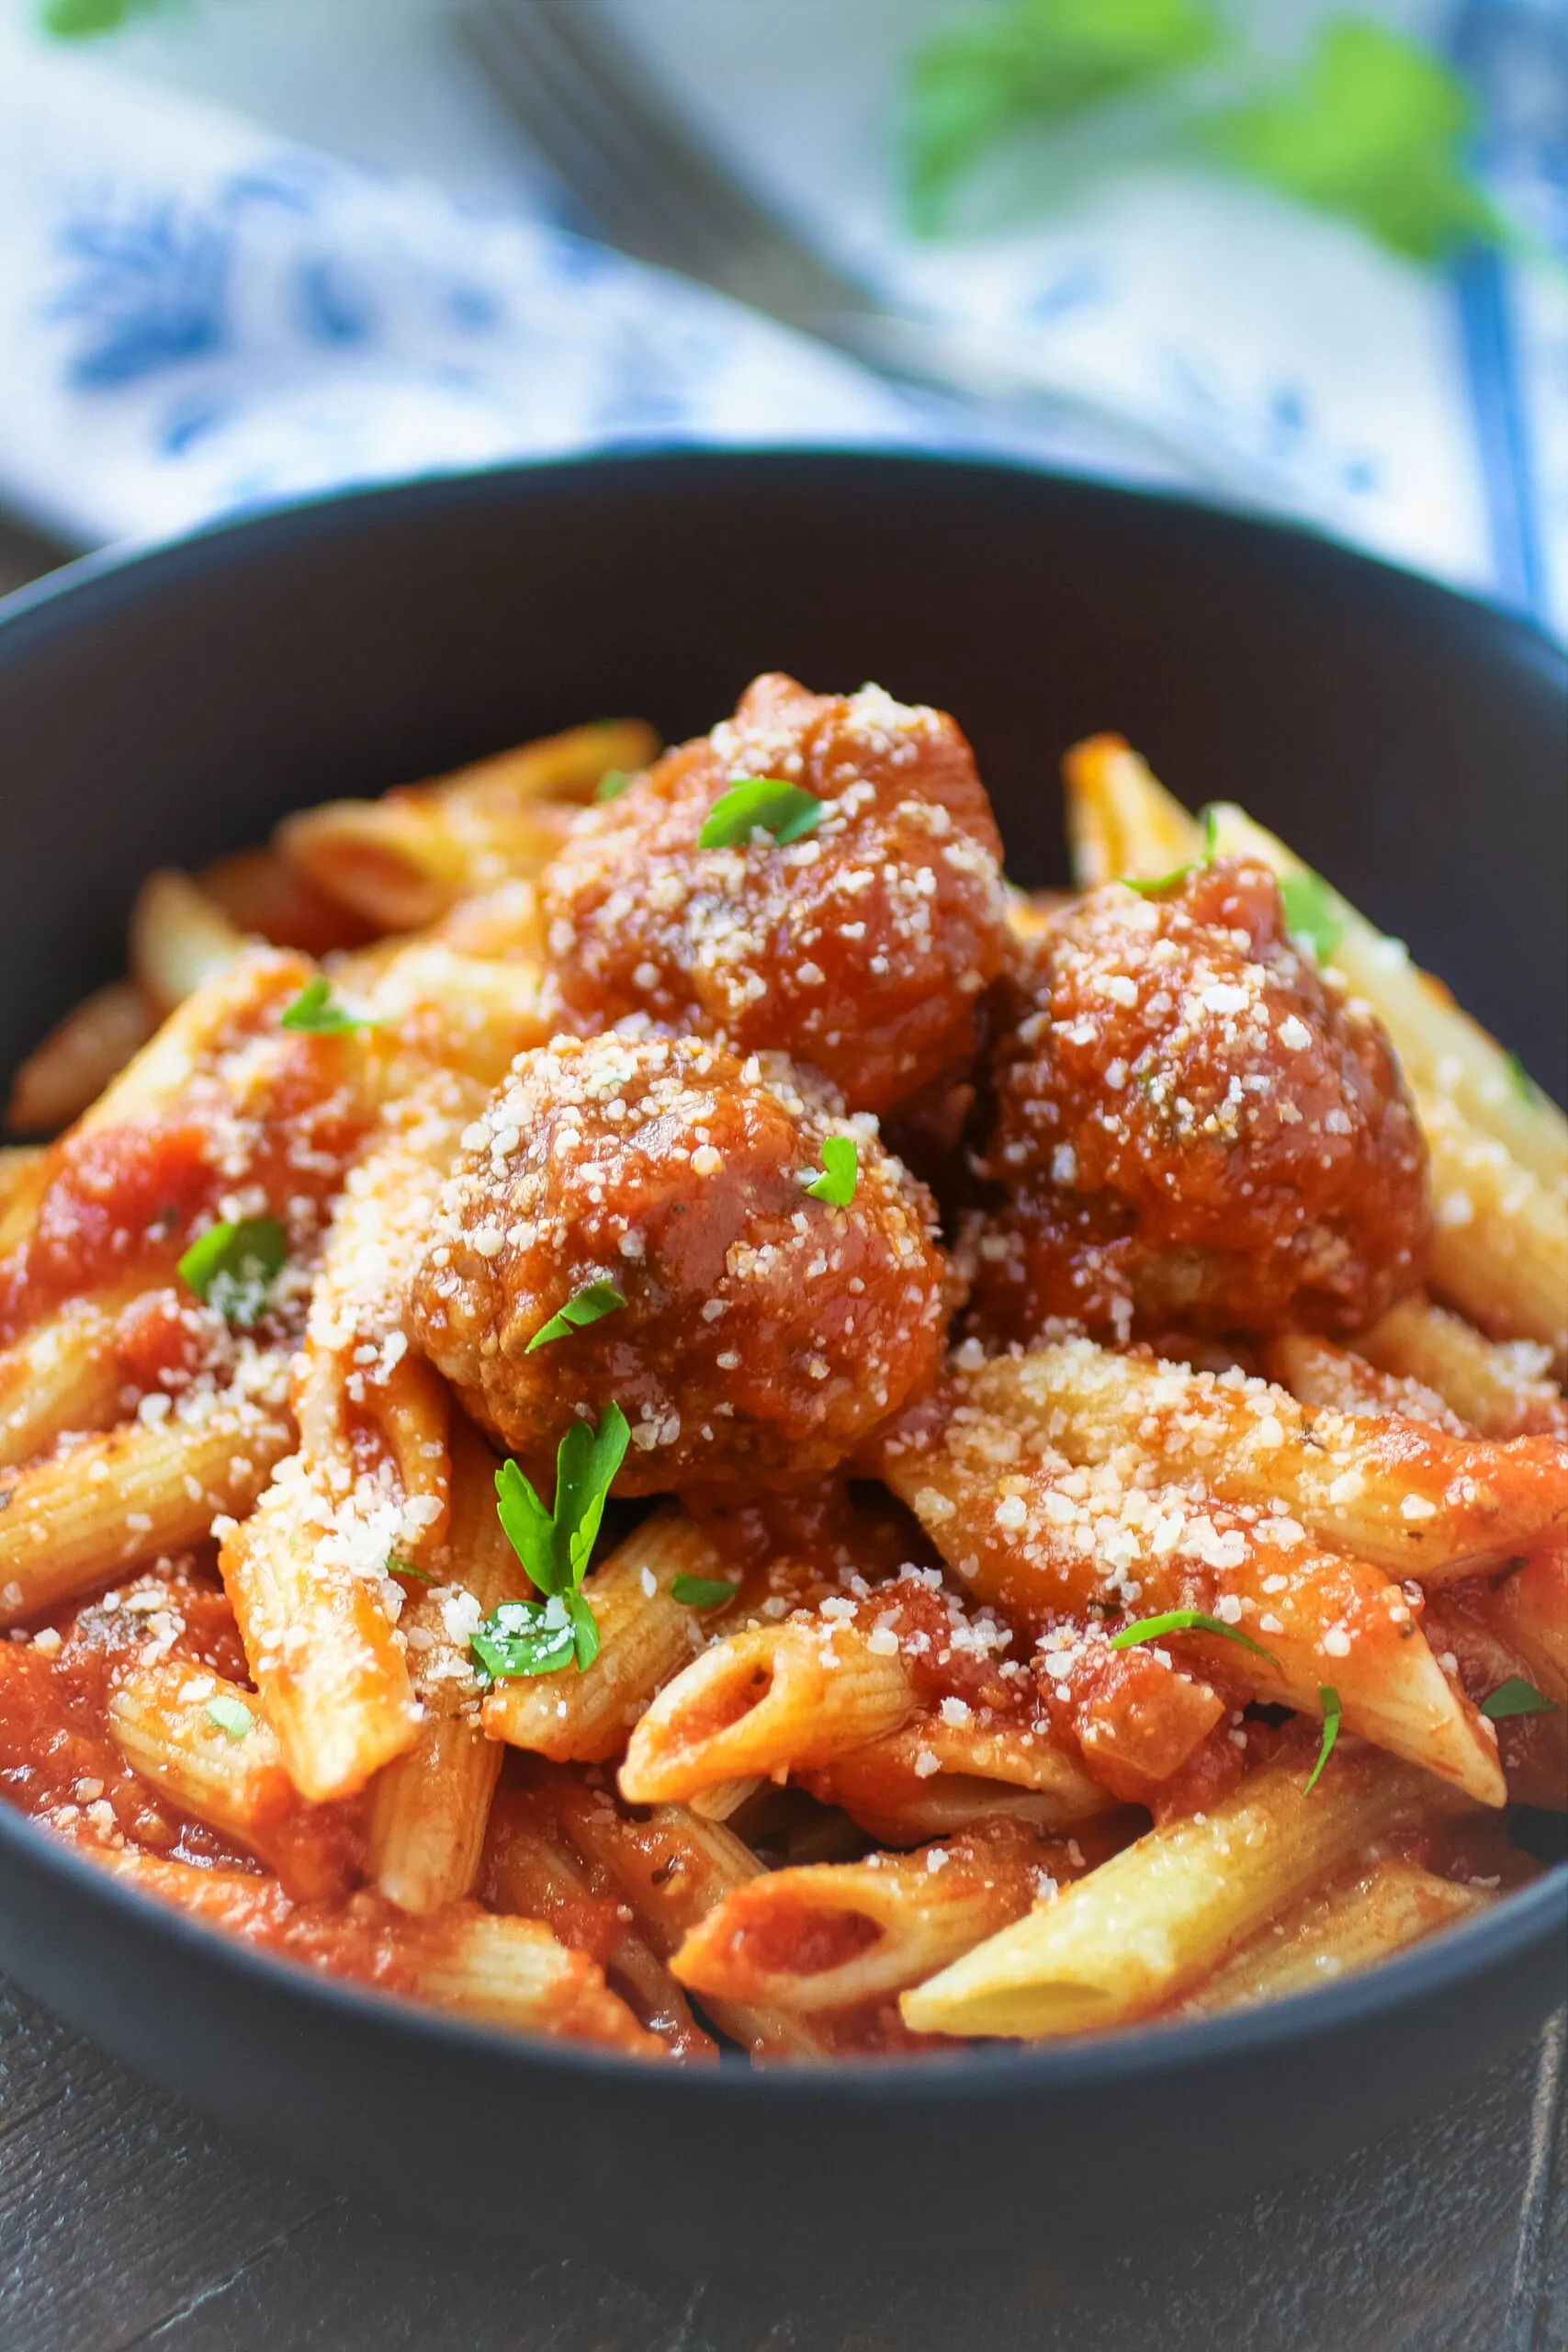 Easy homemade meatballs piled on your favorite pasta make a hearty, classic meal.